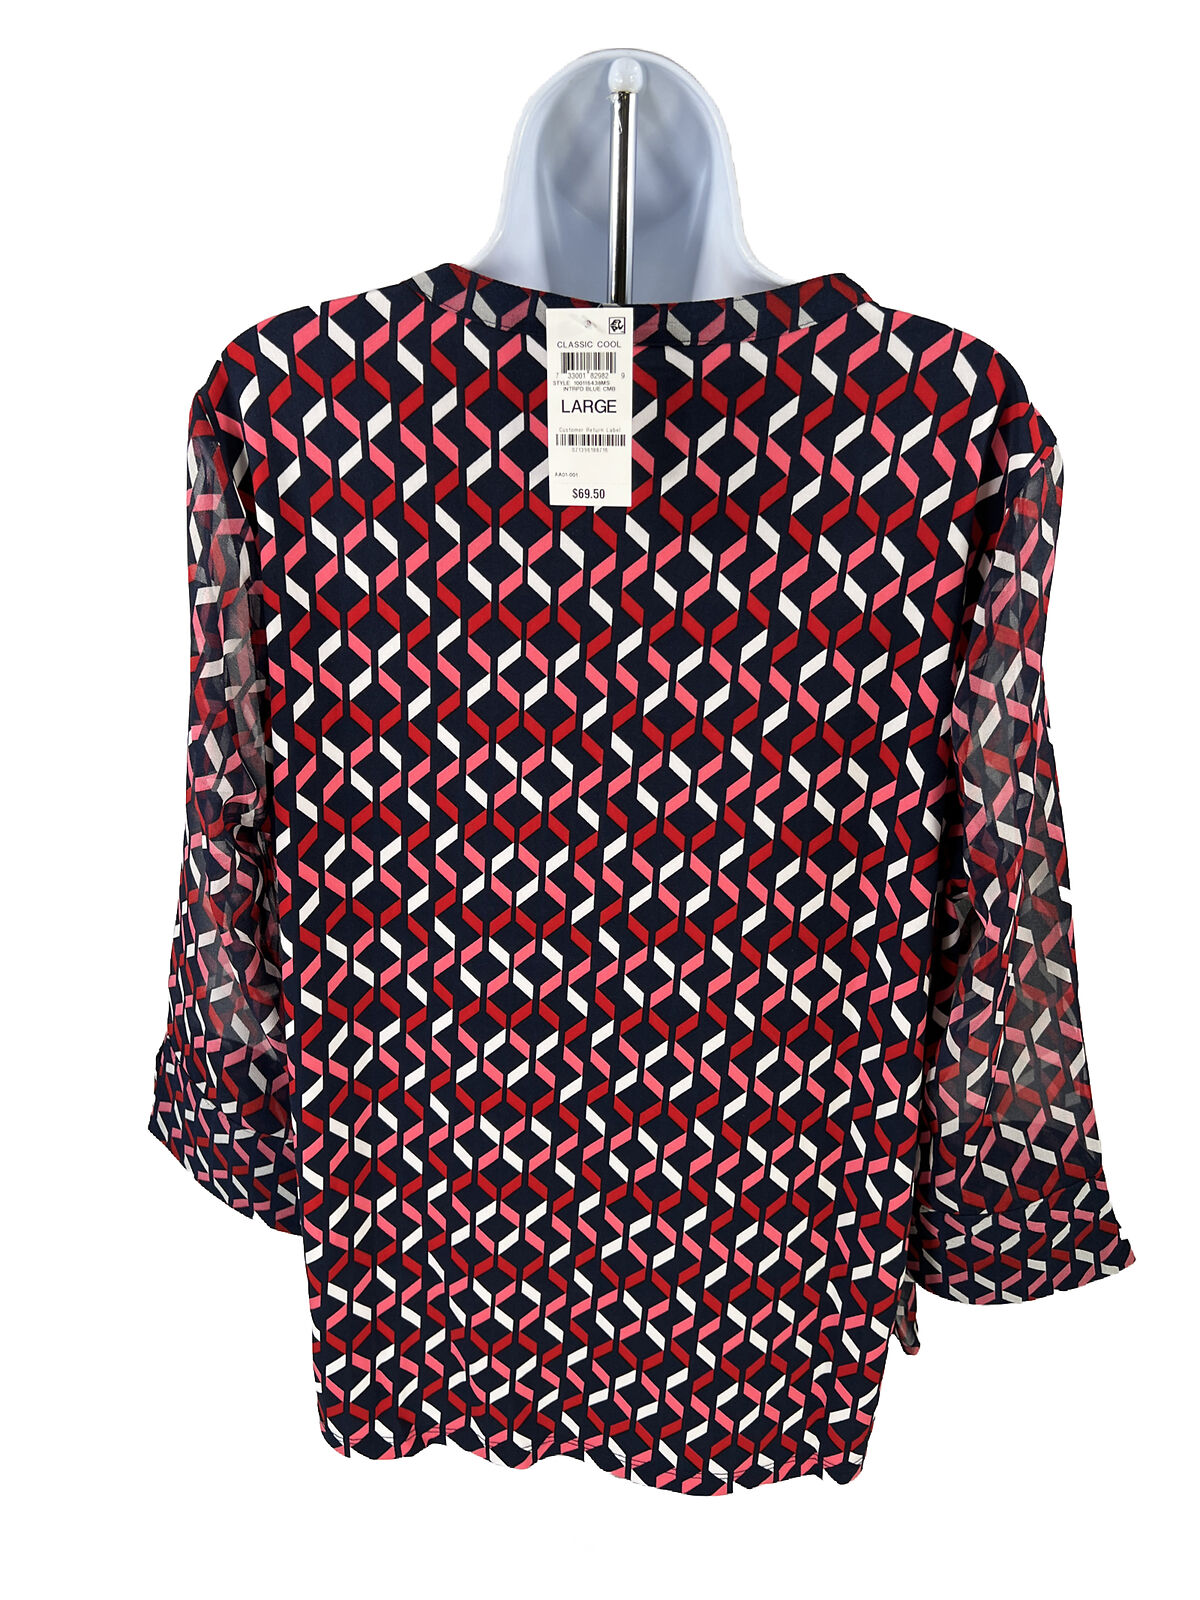 NEW Charter Club Women's Blue/Red 3/4 Sleeve Sheer Top Blouse - L